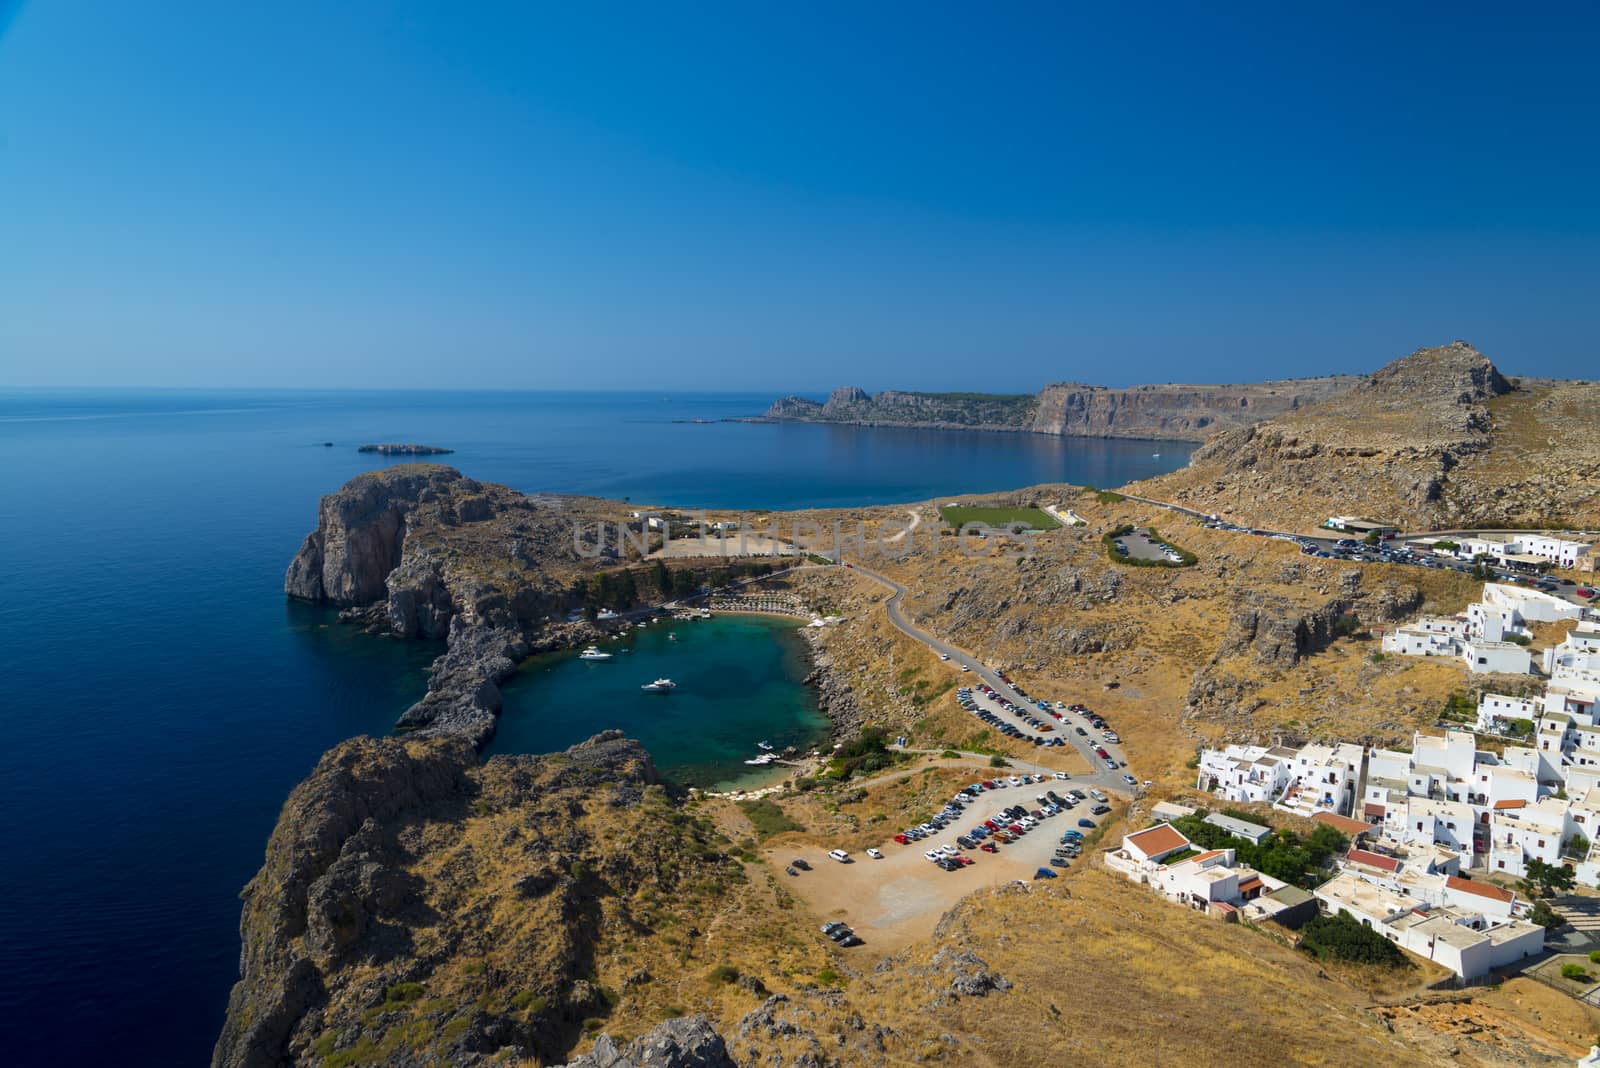 Beautiful blue-green bay seen fromthe heights of the Acropolis of Lindos